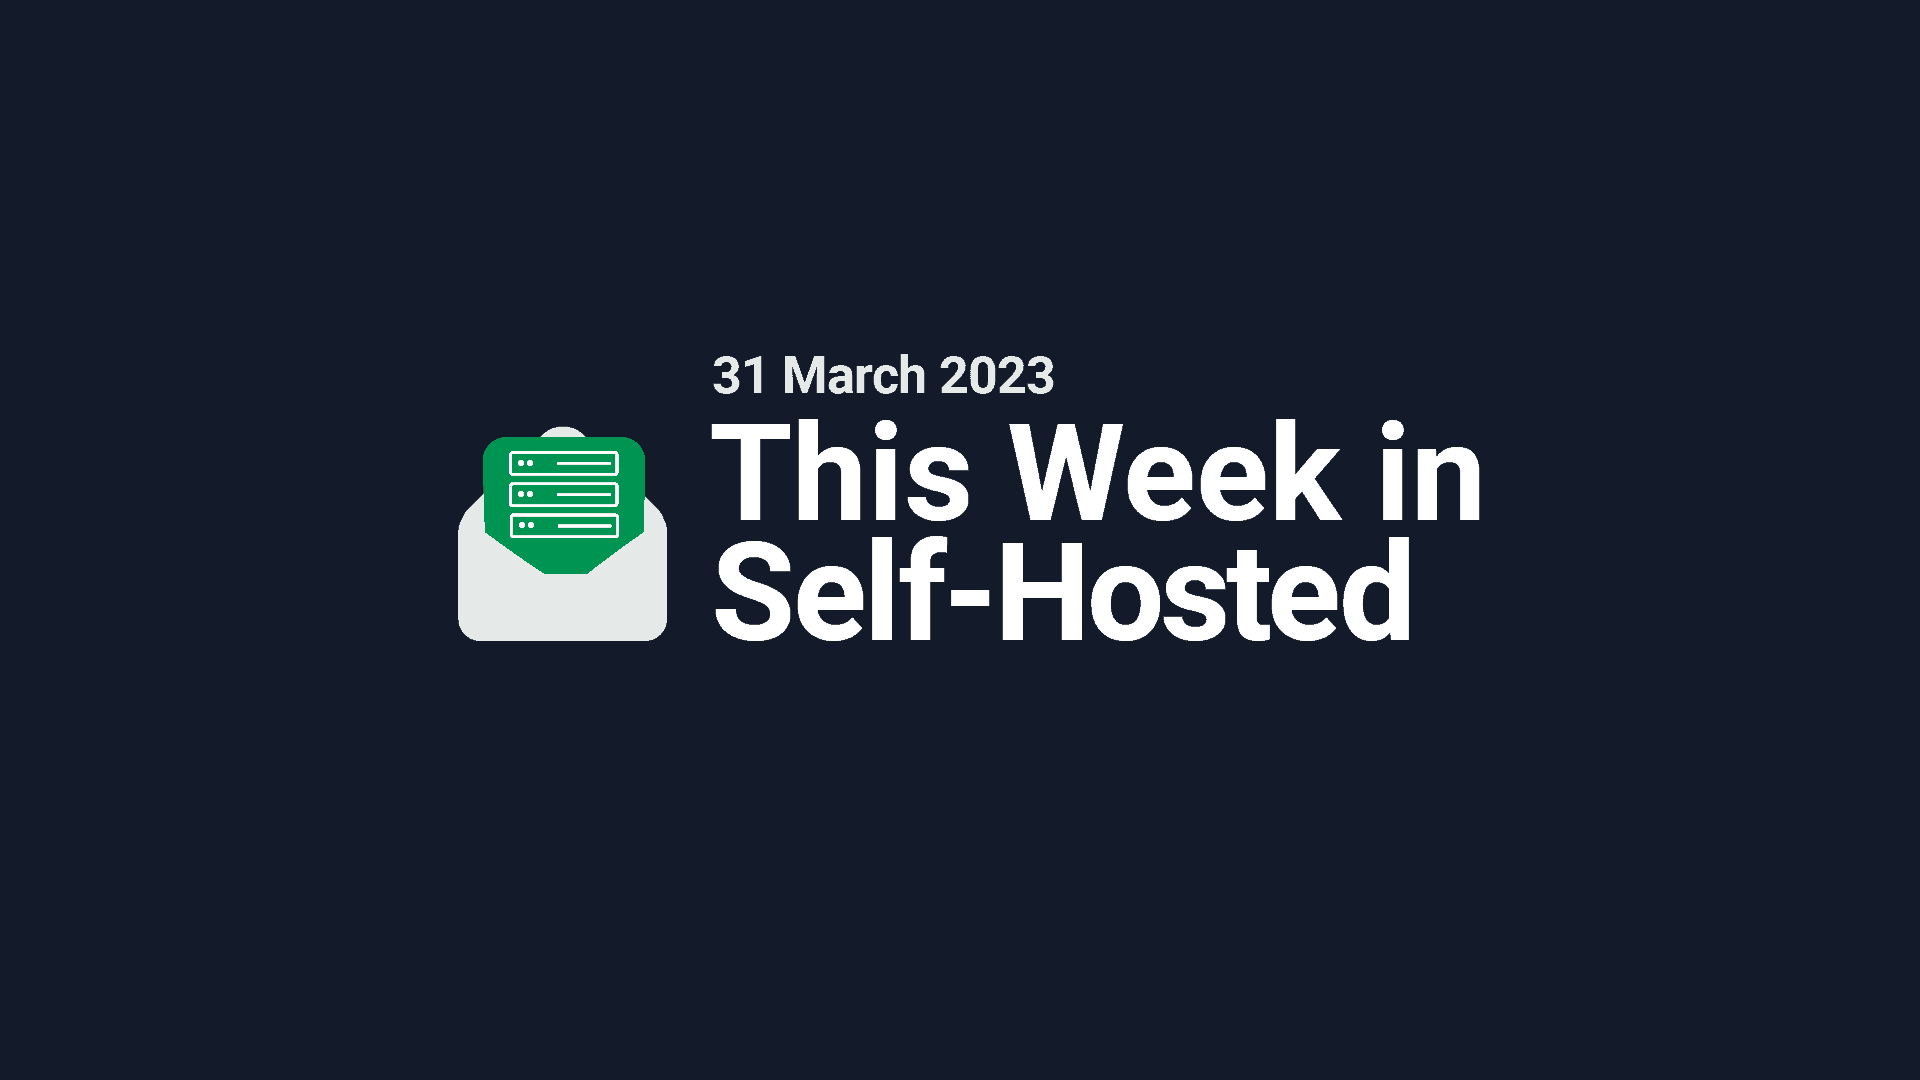 This Week in Self-Hosted (31 March 2023) Post image